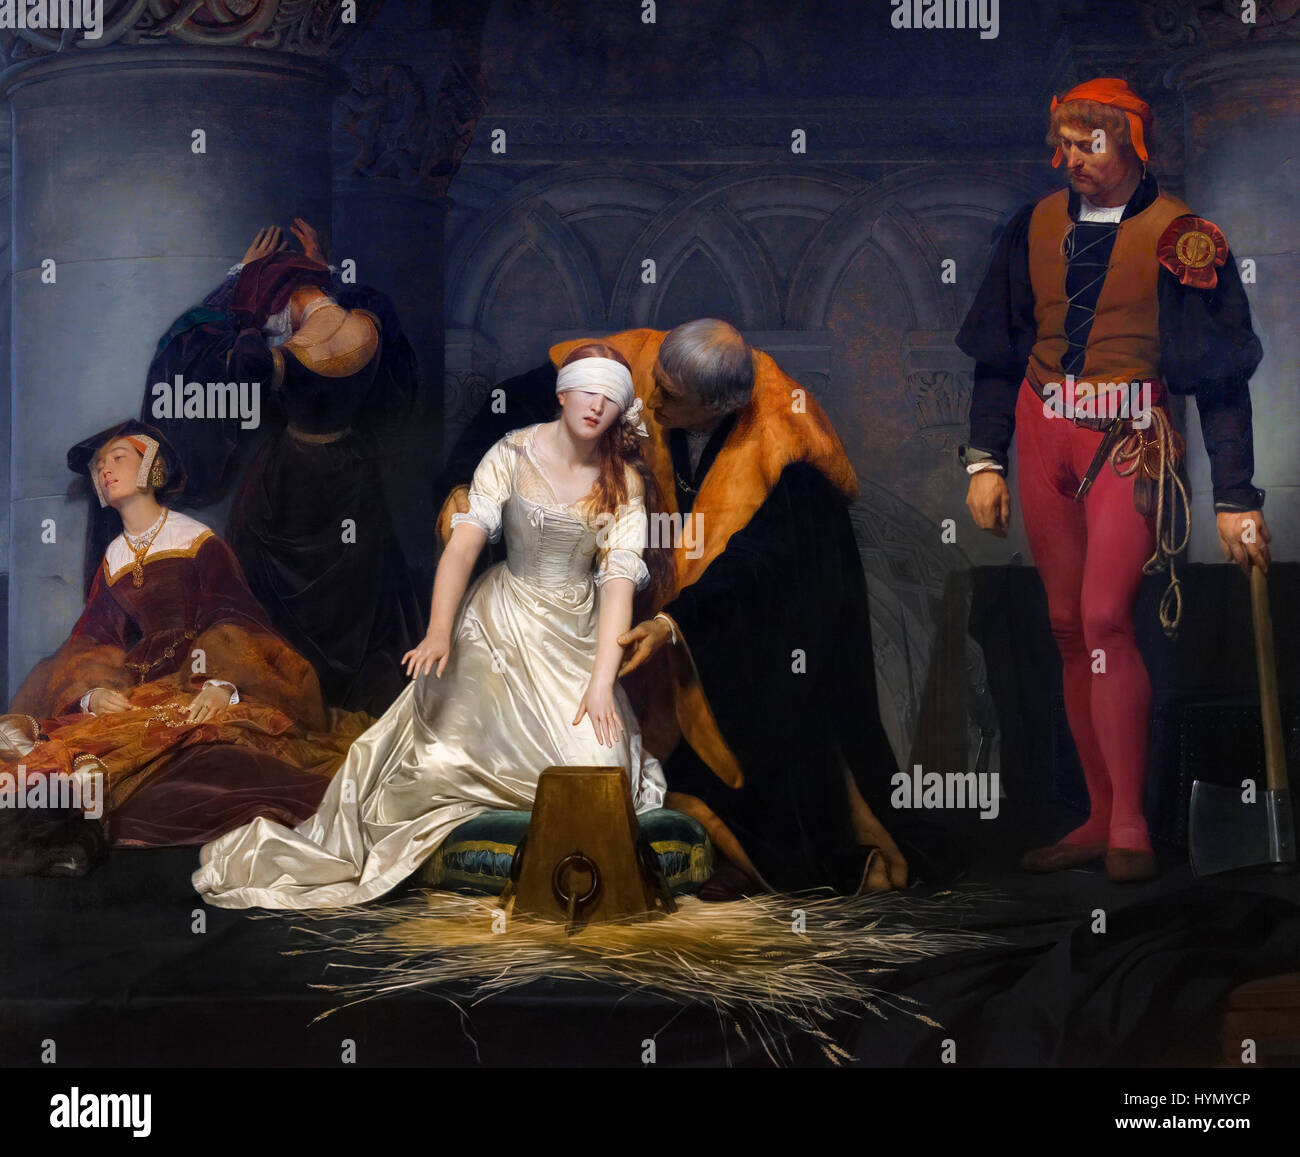 The Execution of Lady Jane Grey by Paul delaroche (1795-1856), oil on canvas, 1833. Lady Jane Grey reigned as queen of England for 9 days in 1553. Stock Photo